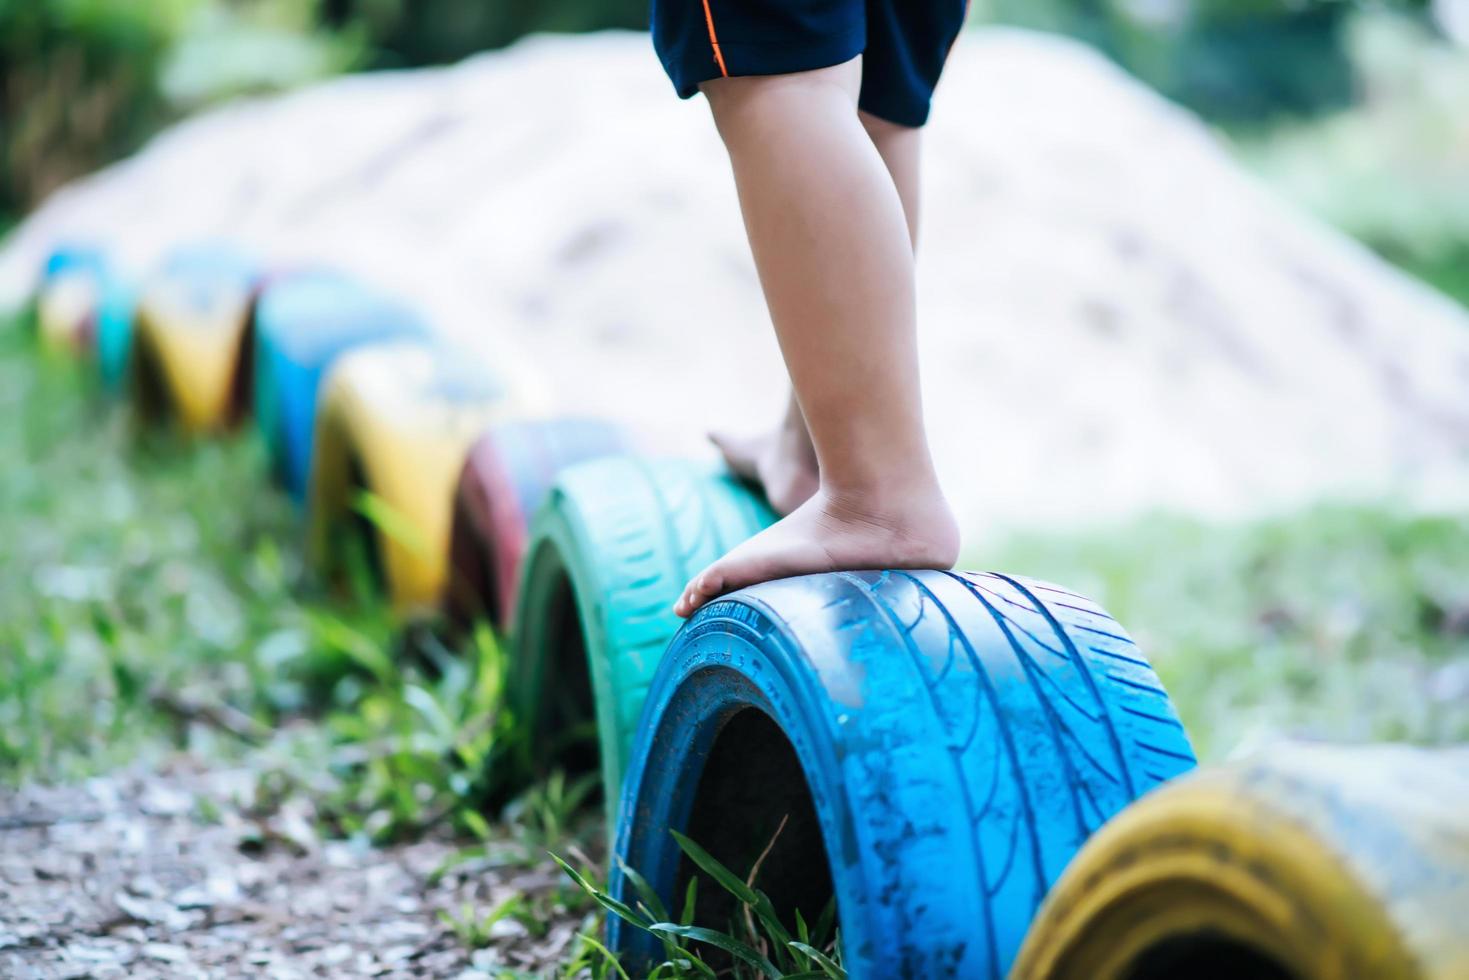 Kid running on tires in the playground photo